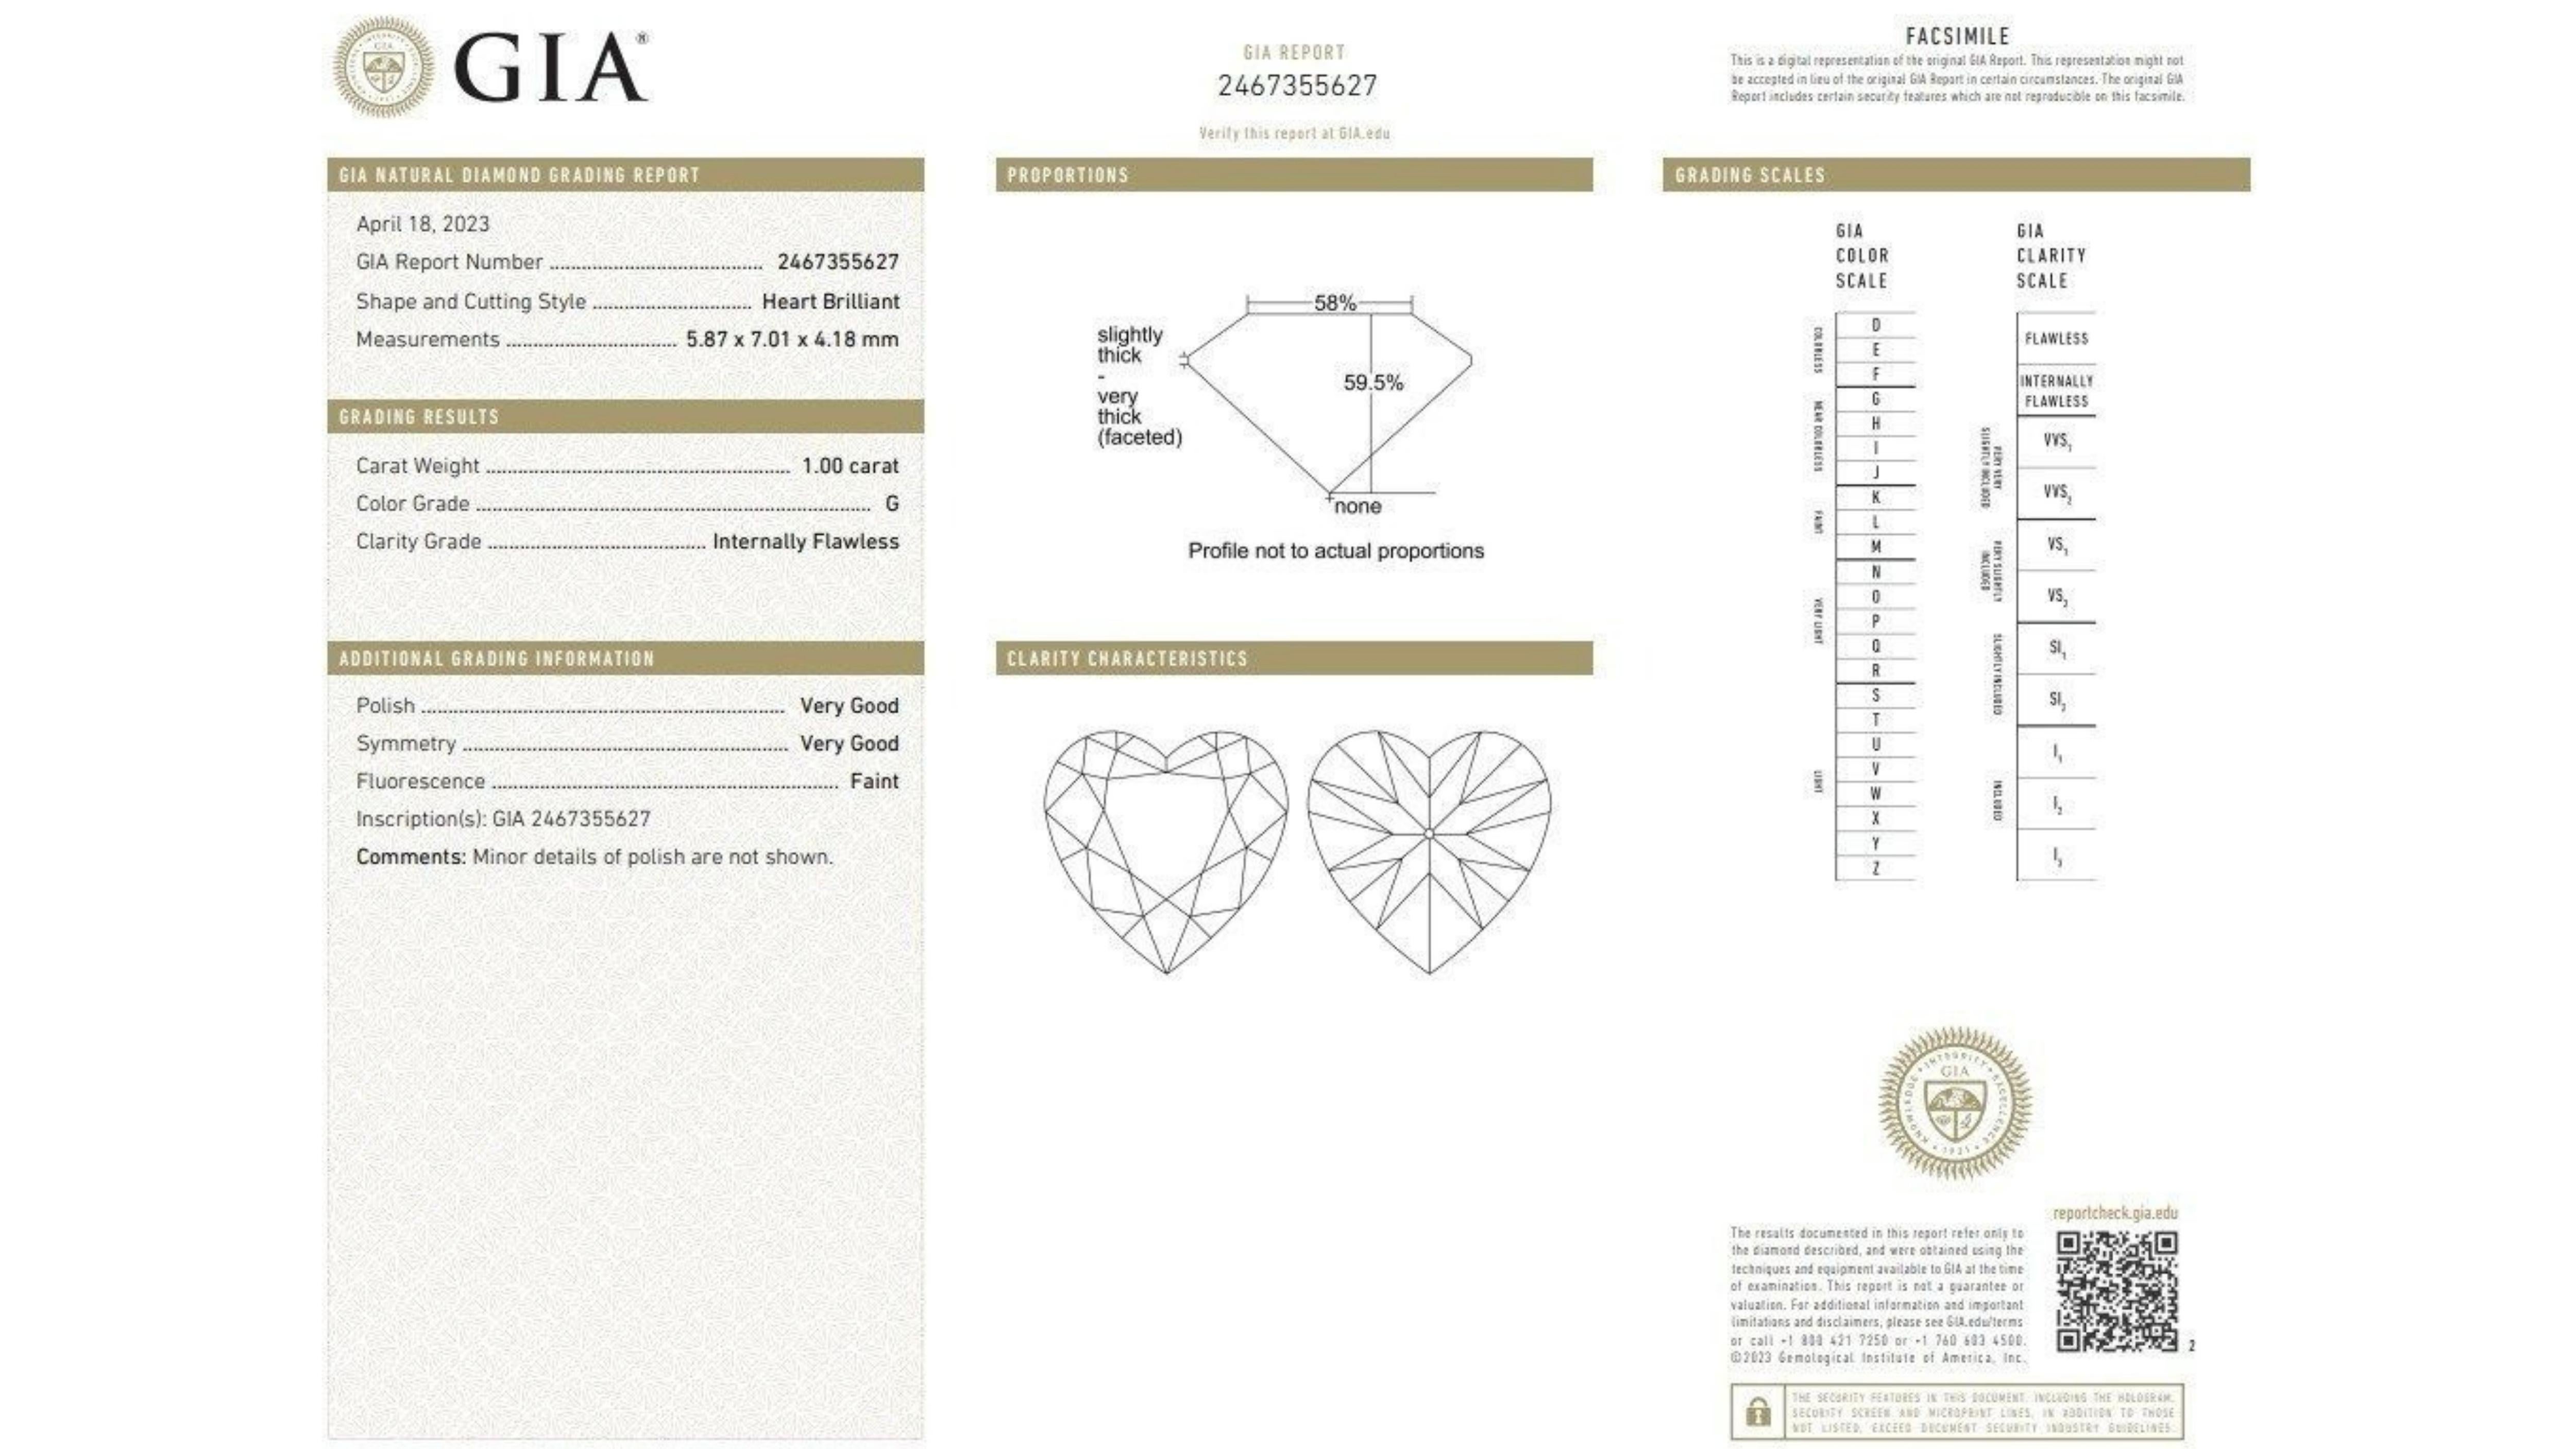 Sparkling heart brilliant cut natural diamond in a 1 carat G IF VG polish and symmetry. This diamond comes with a GIA Certificate and laser inscription number.

Cut: Heart Brilliant
Carat weight: 1ct
Color Grade: G
Clarity Grade: Internally